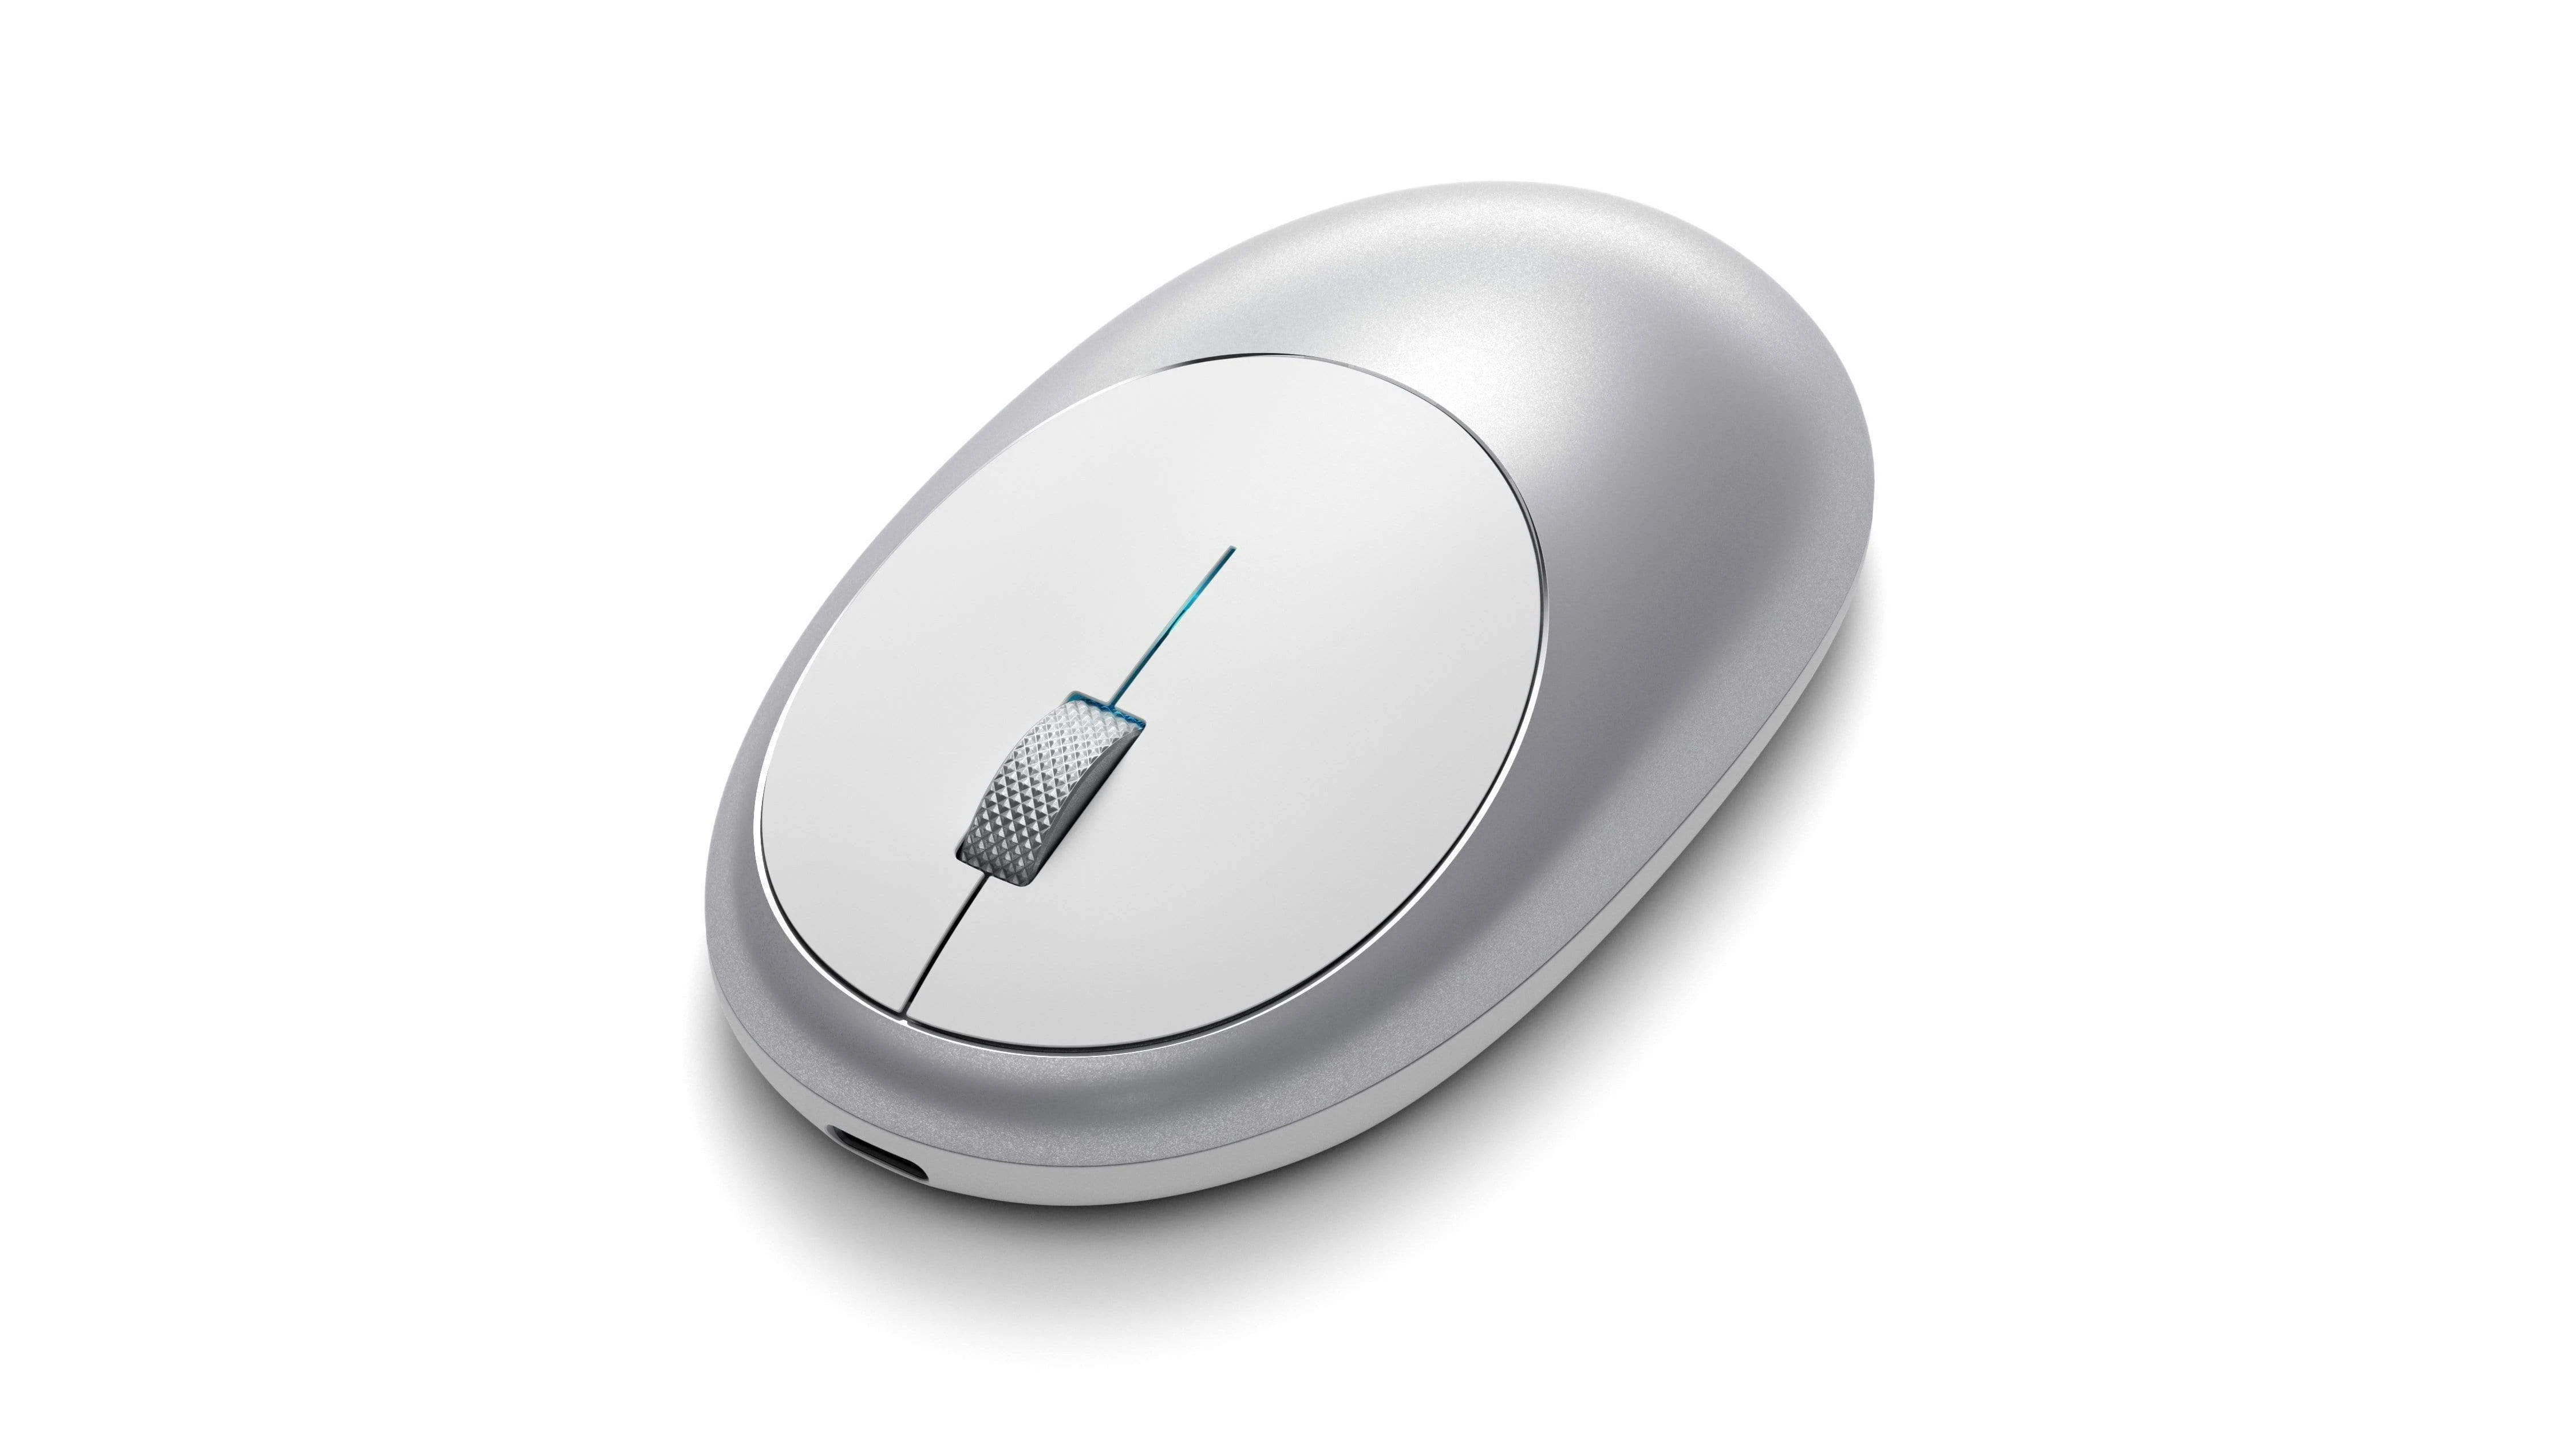 Satechi M1 Wireless Mouse against a white background